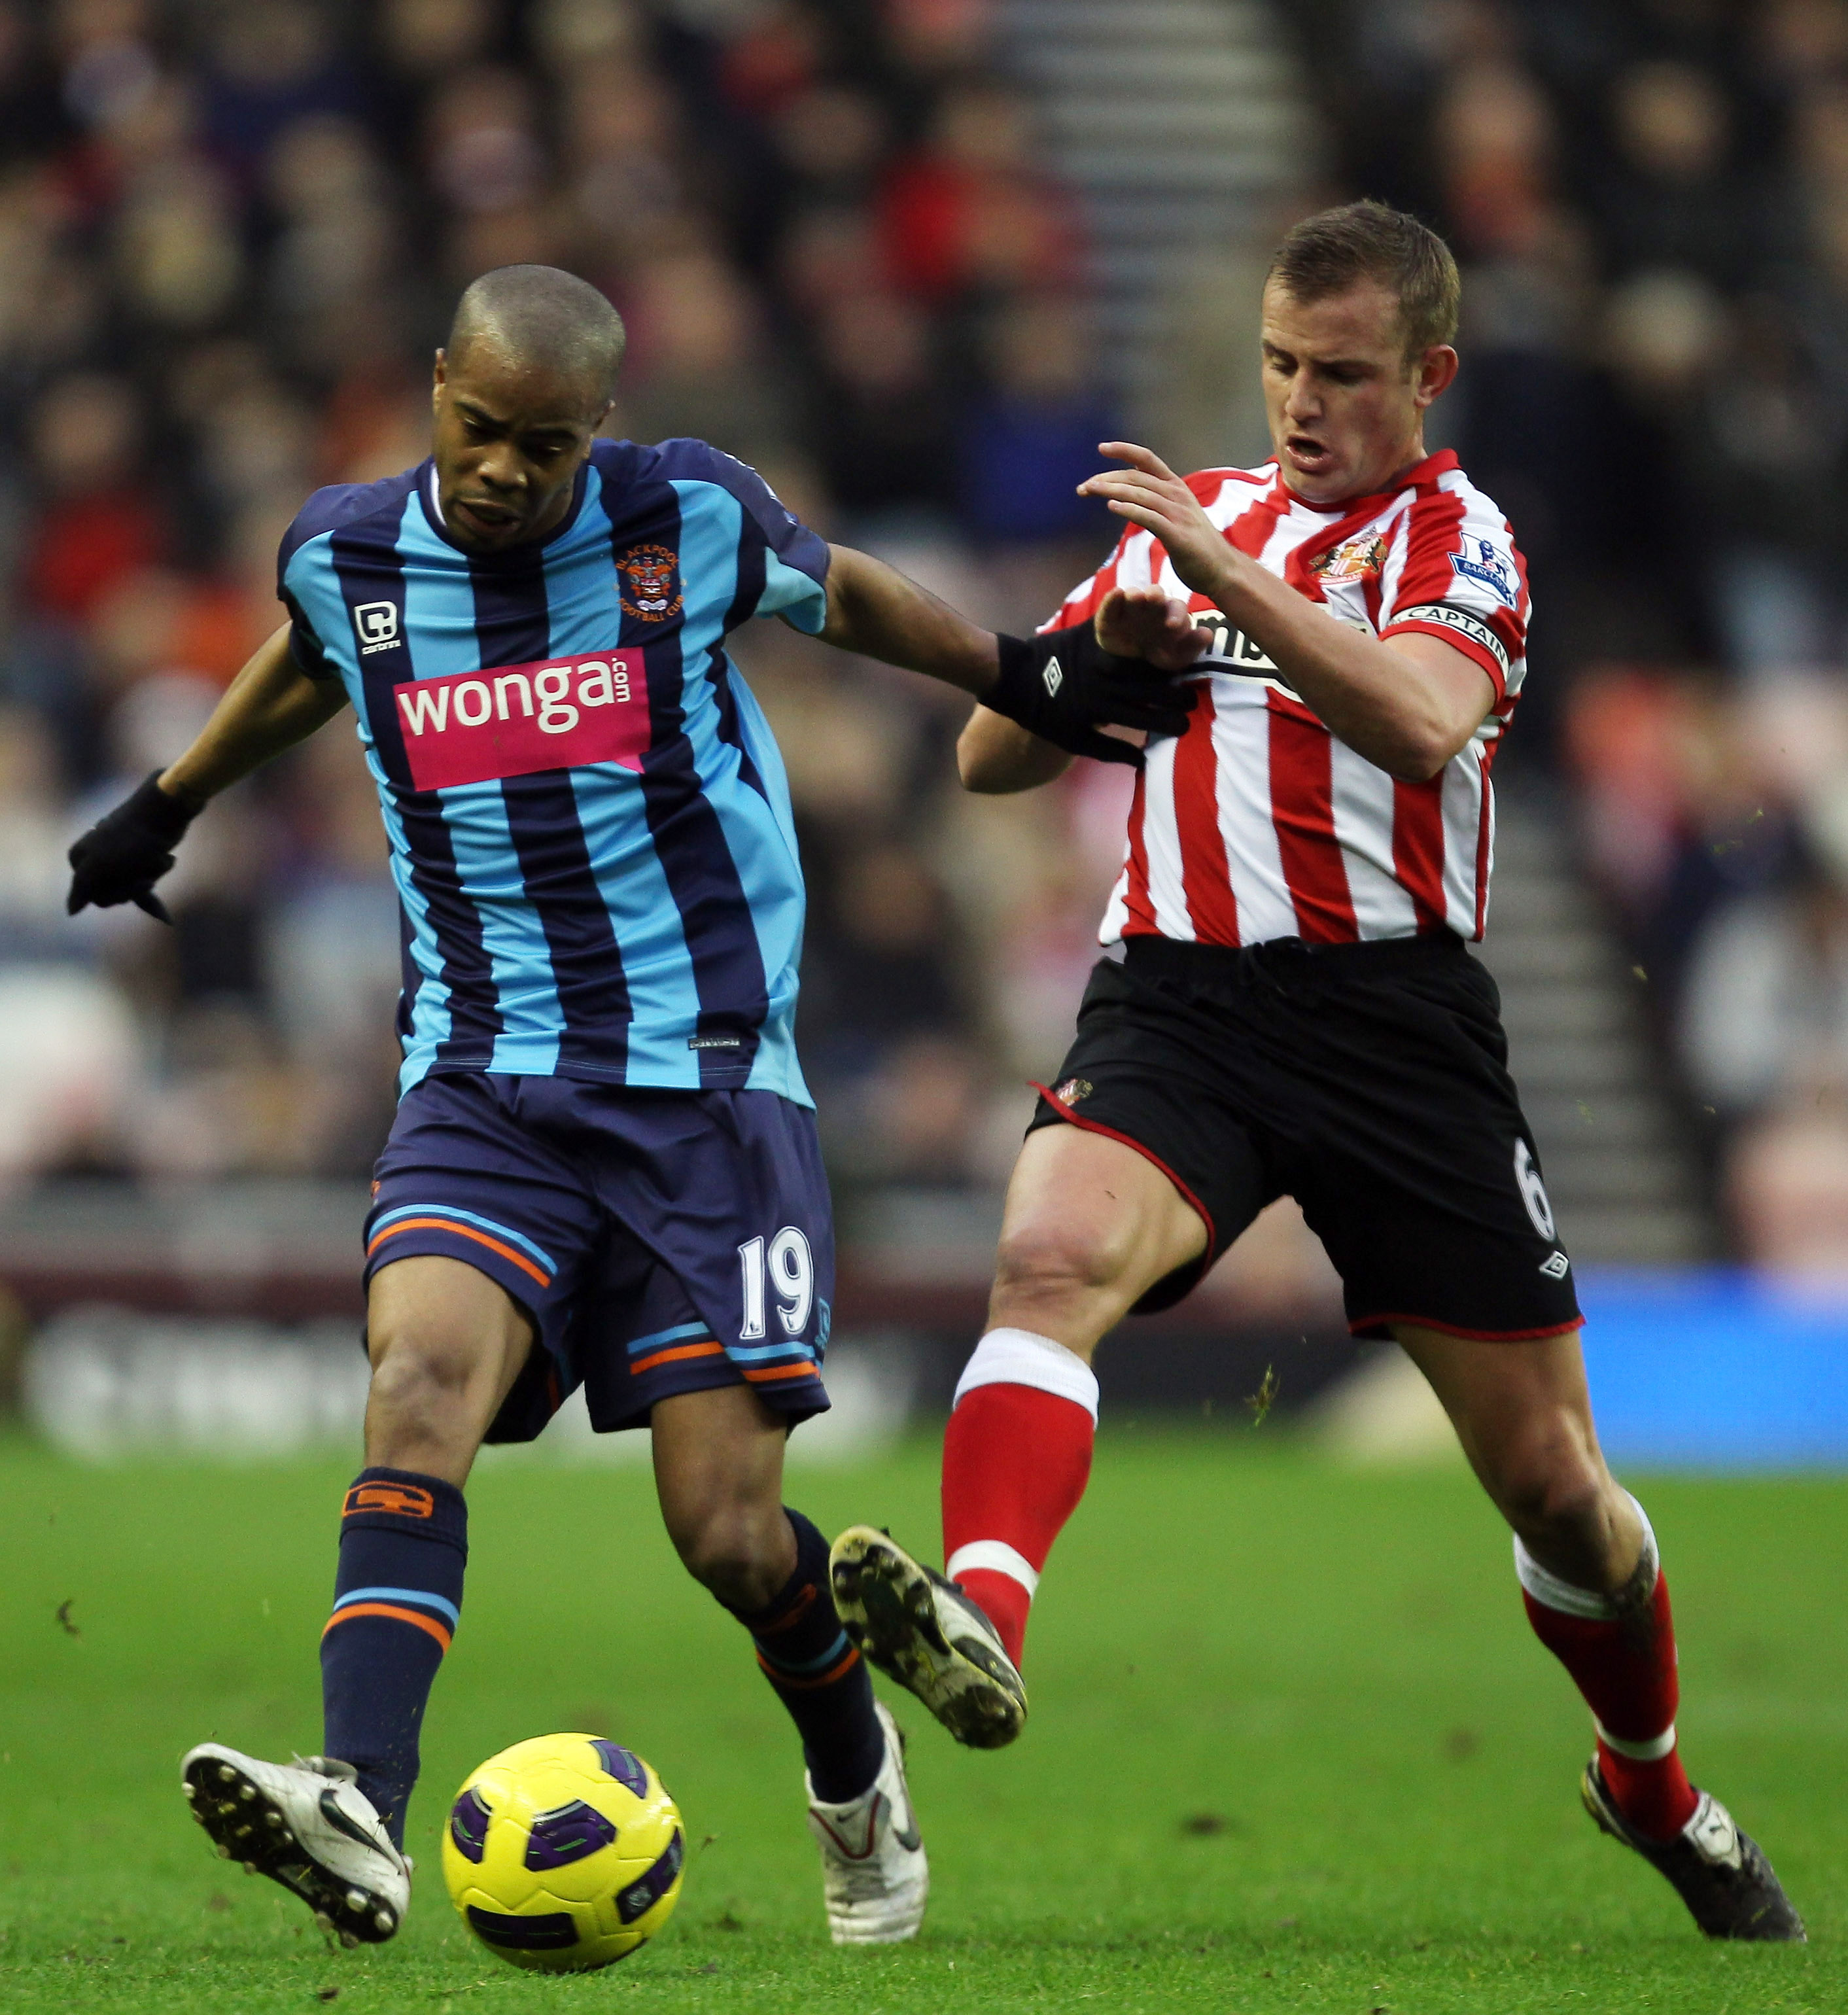 SUNDERLAND, ENGLAND - DECEMBER 28:  Lee Cattermole of Sunderland tries to tackle Ludovic Sylvestre of Blackpool during the Barclays Premier League match between Sunderland and Blackpool at the Stadium of Light on December 28, 2010 in Sunderland, England.